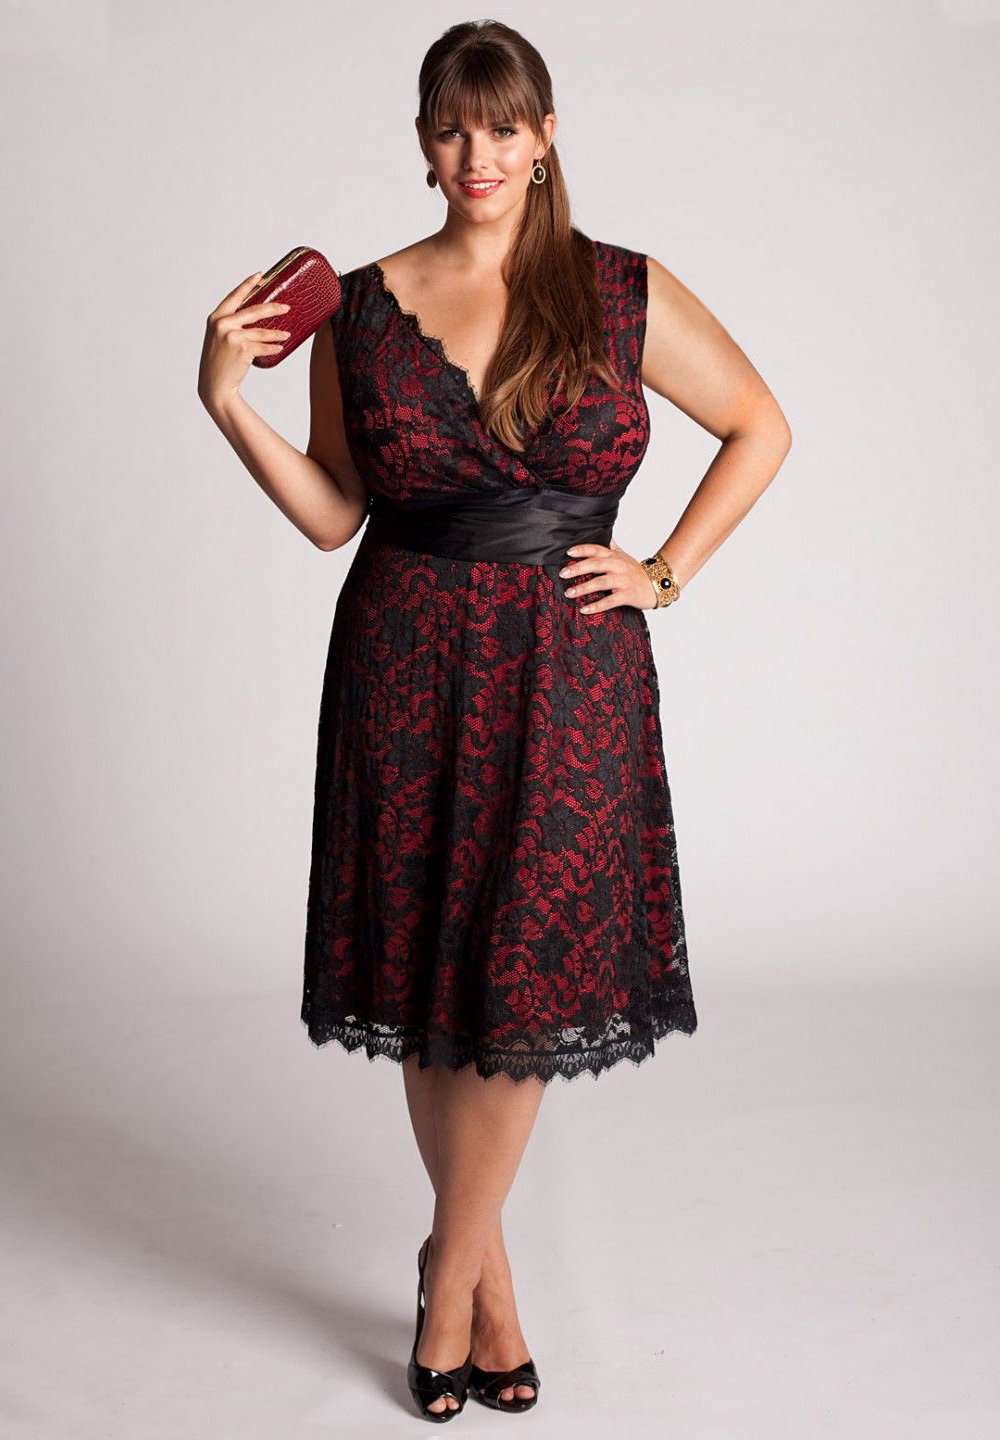 Are you a curvy dress girl, but not necessarily a dressy girl? No